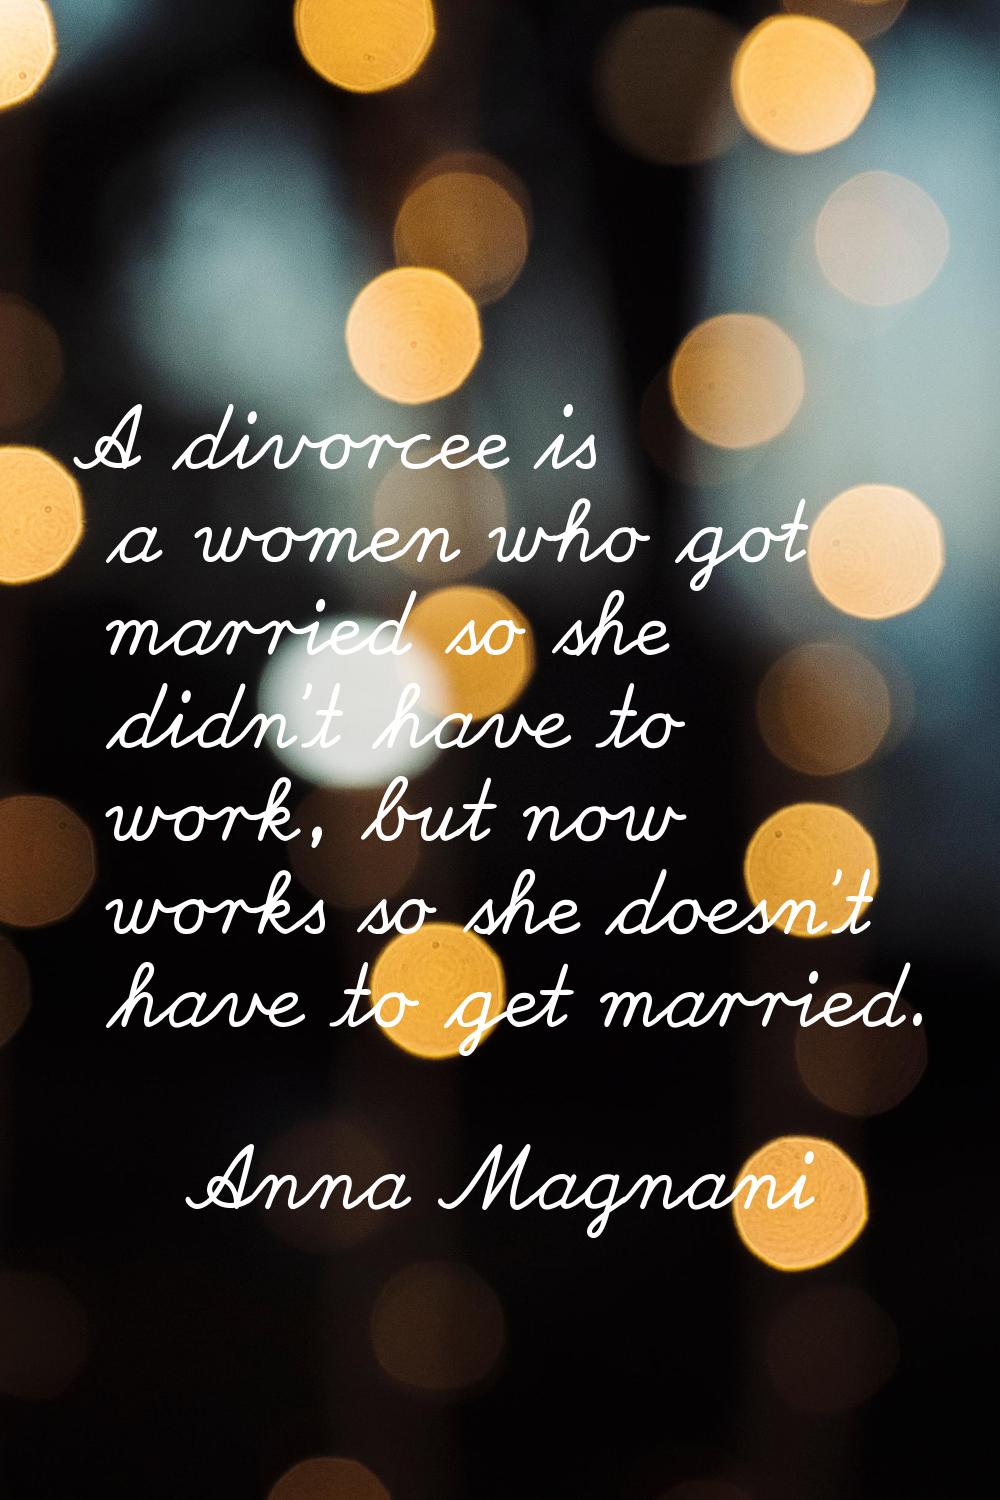 A divorcee is a women who got married so she didn't have to work, but now works so she doesn't have